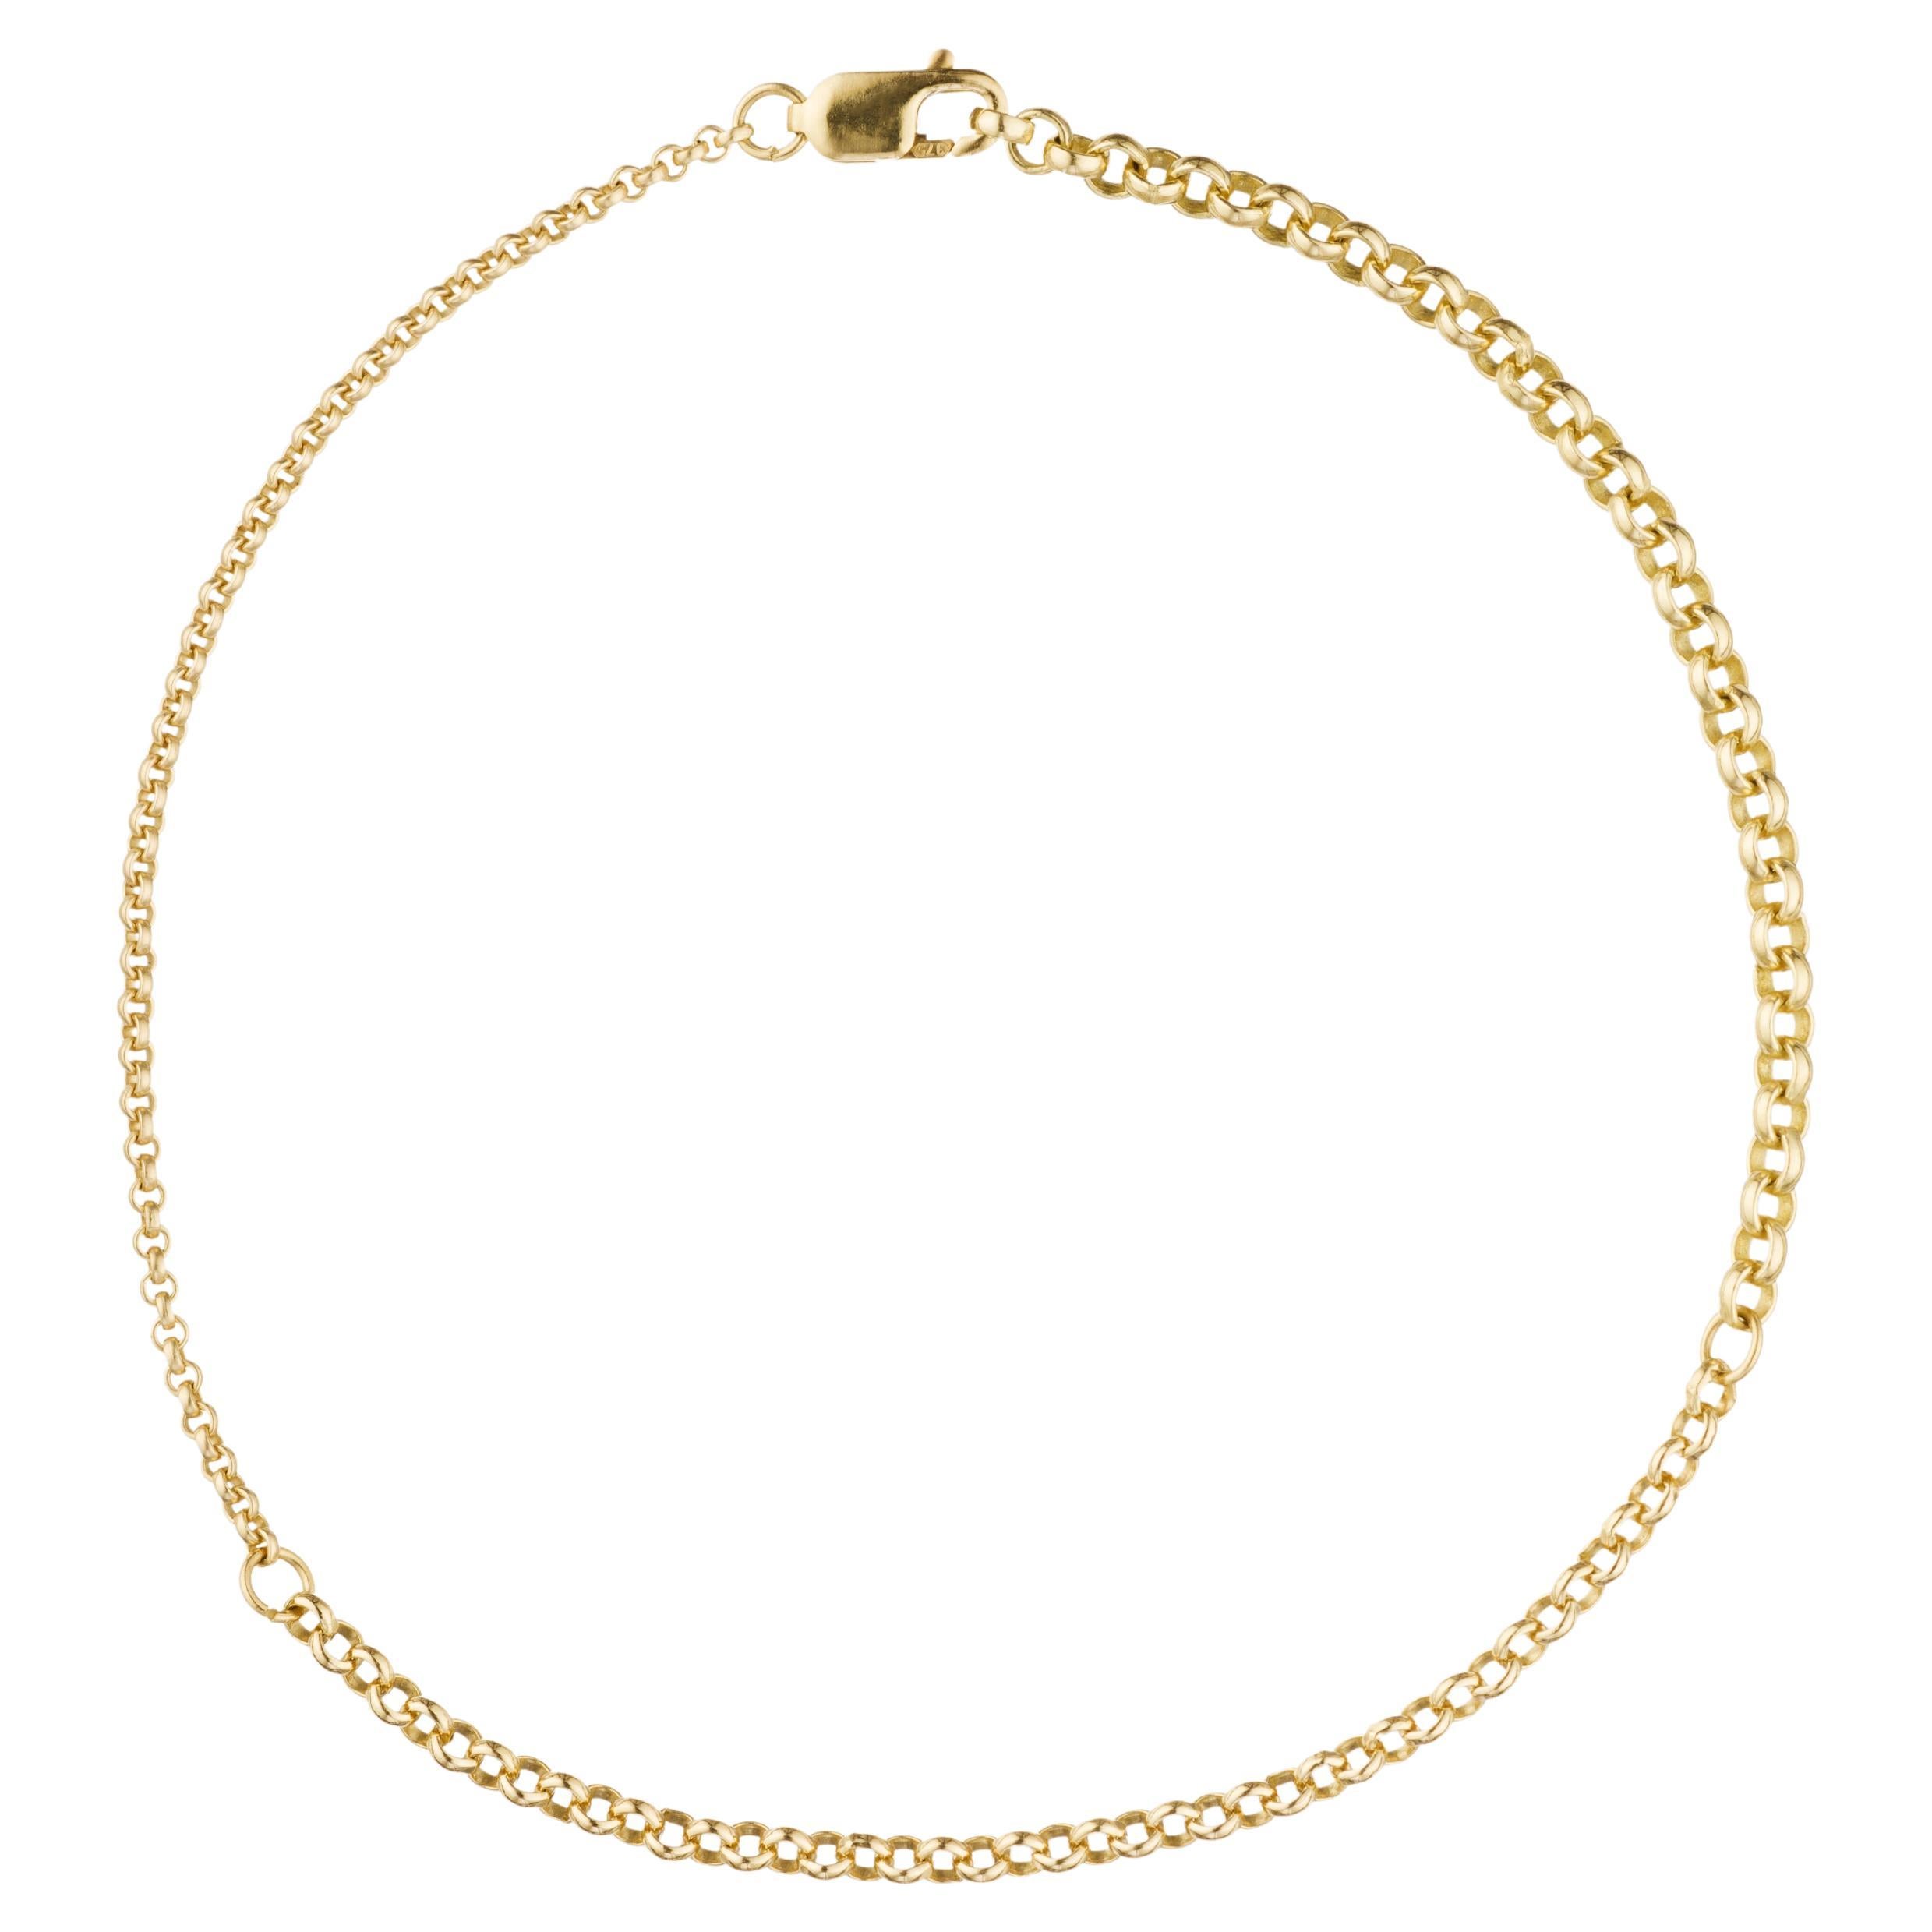 What is the strongest gold chain style?